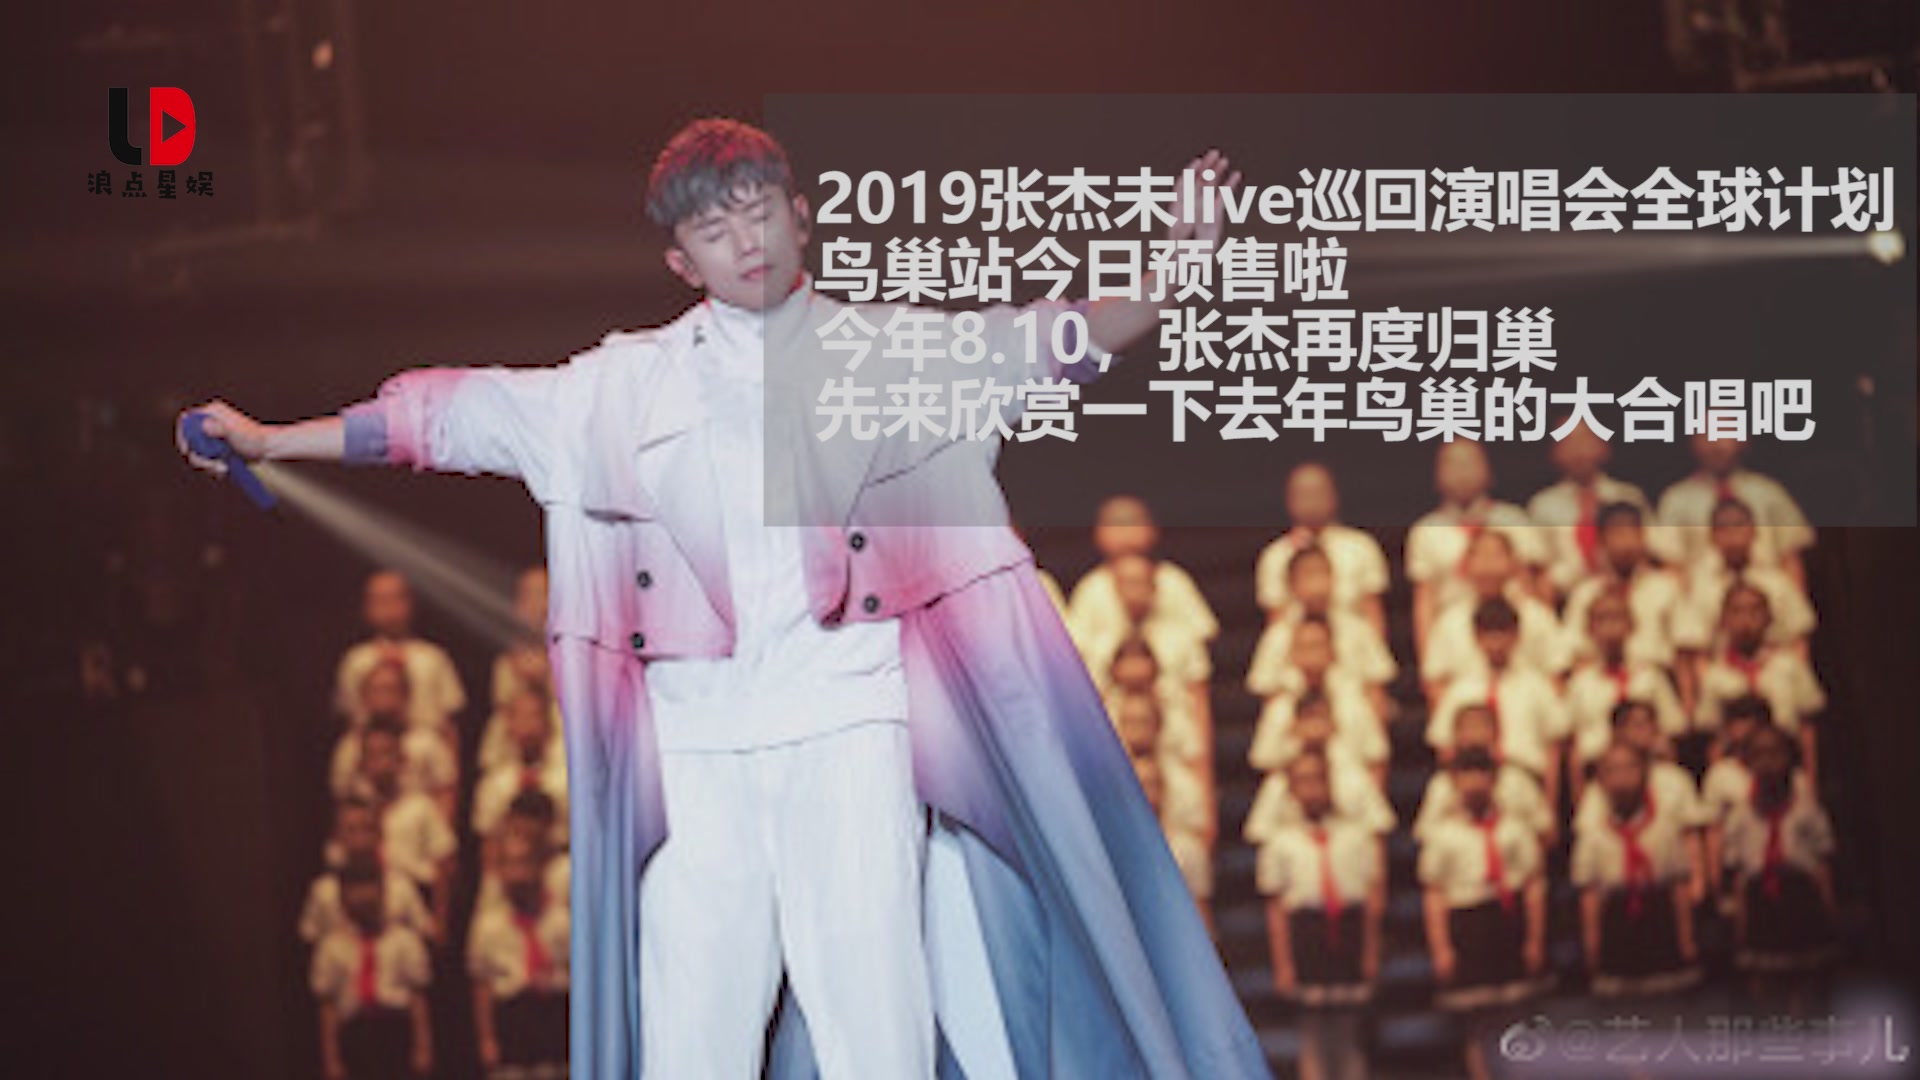 Zhang Jie will hold another concert in Beijing soon, and Jacob will return home.